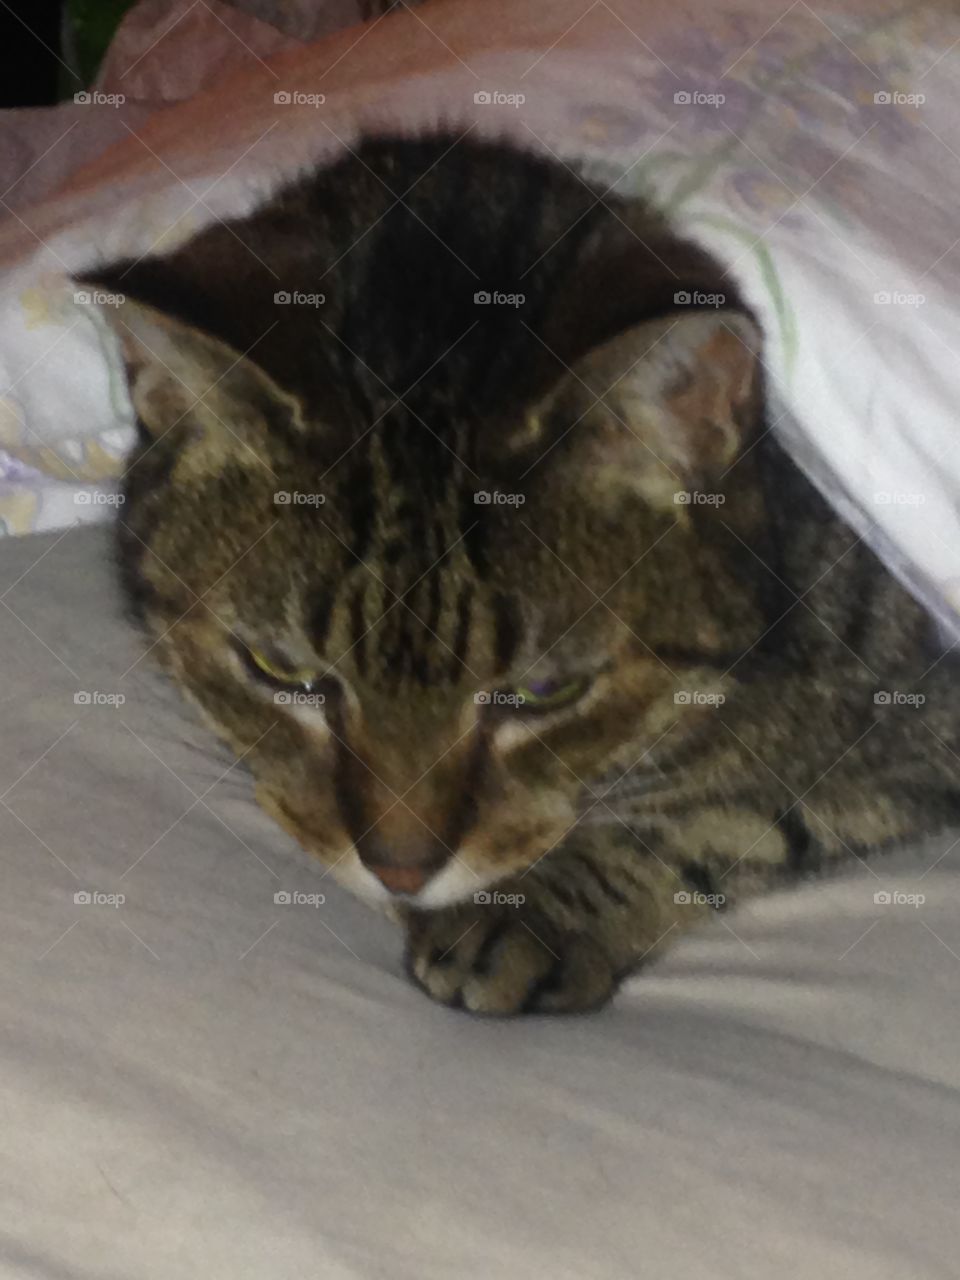 Mia (our Scottish Wildcat/Bengal mix) tucked in under the bedclothes for a nap